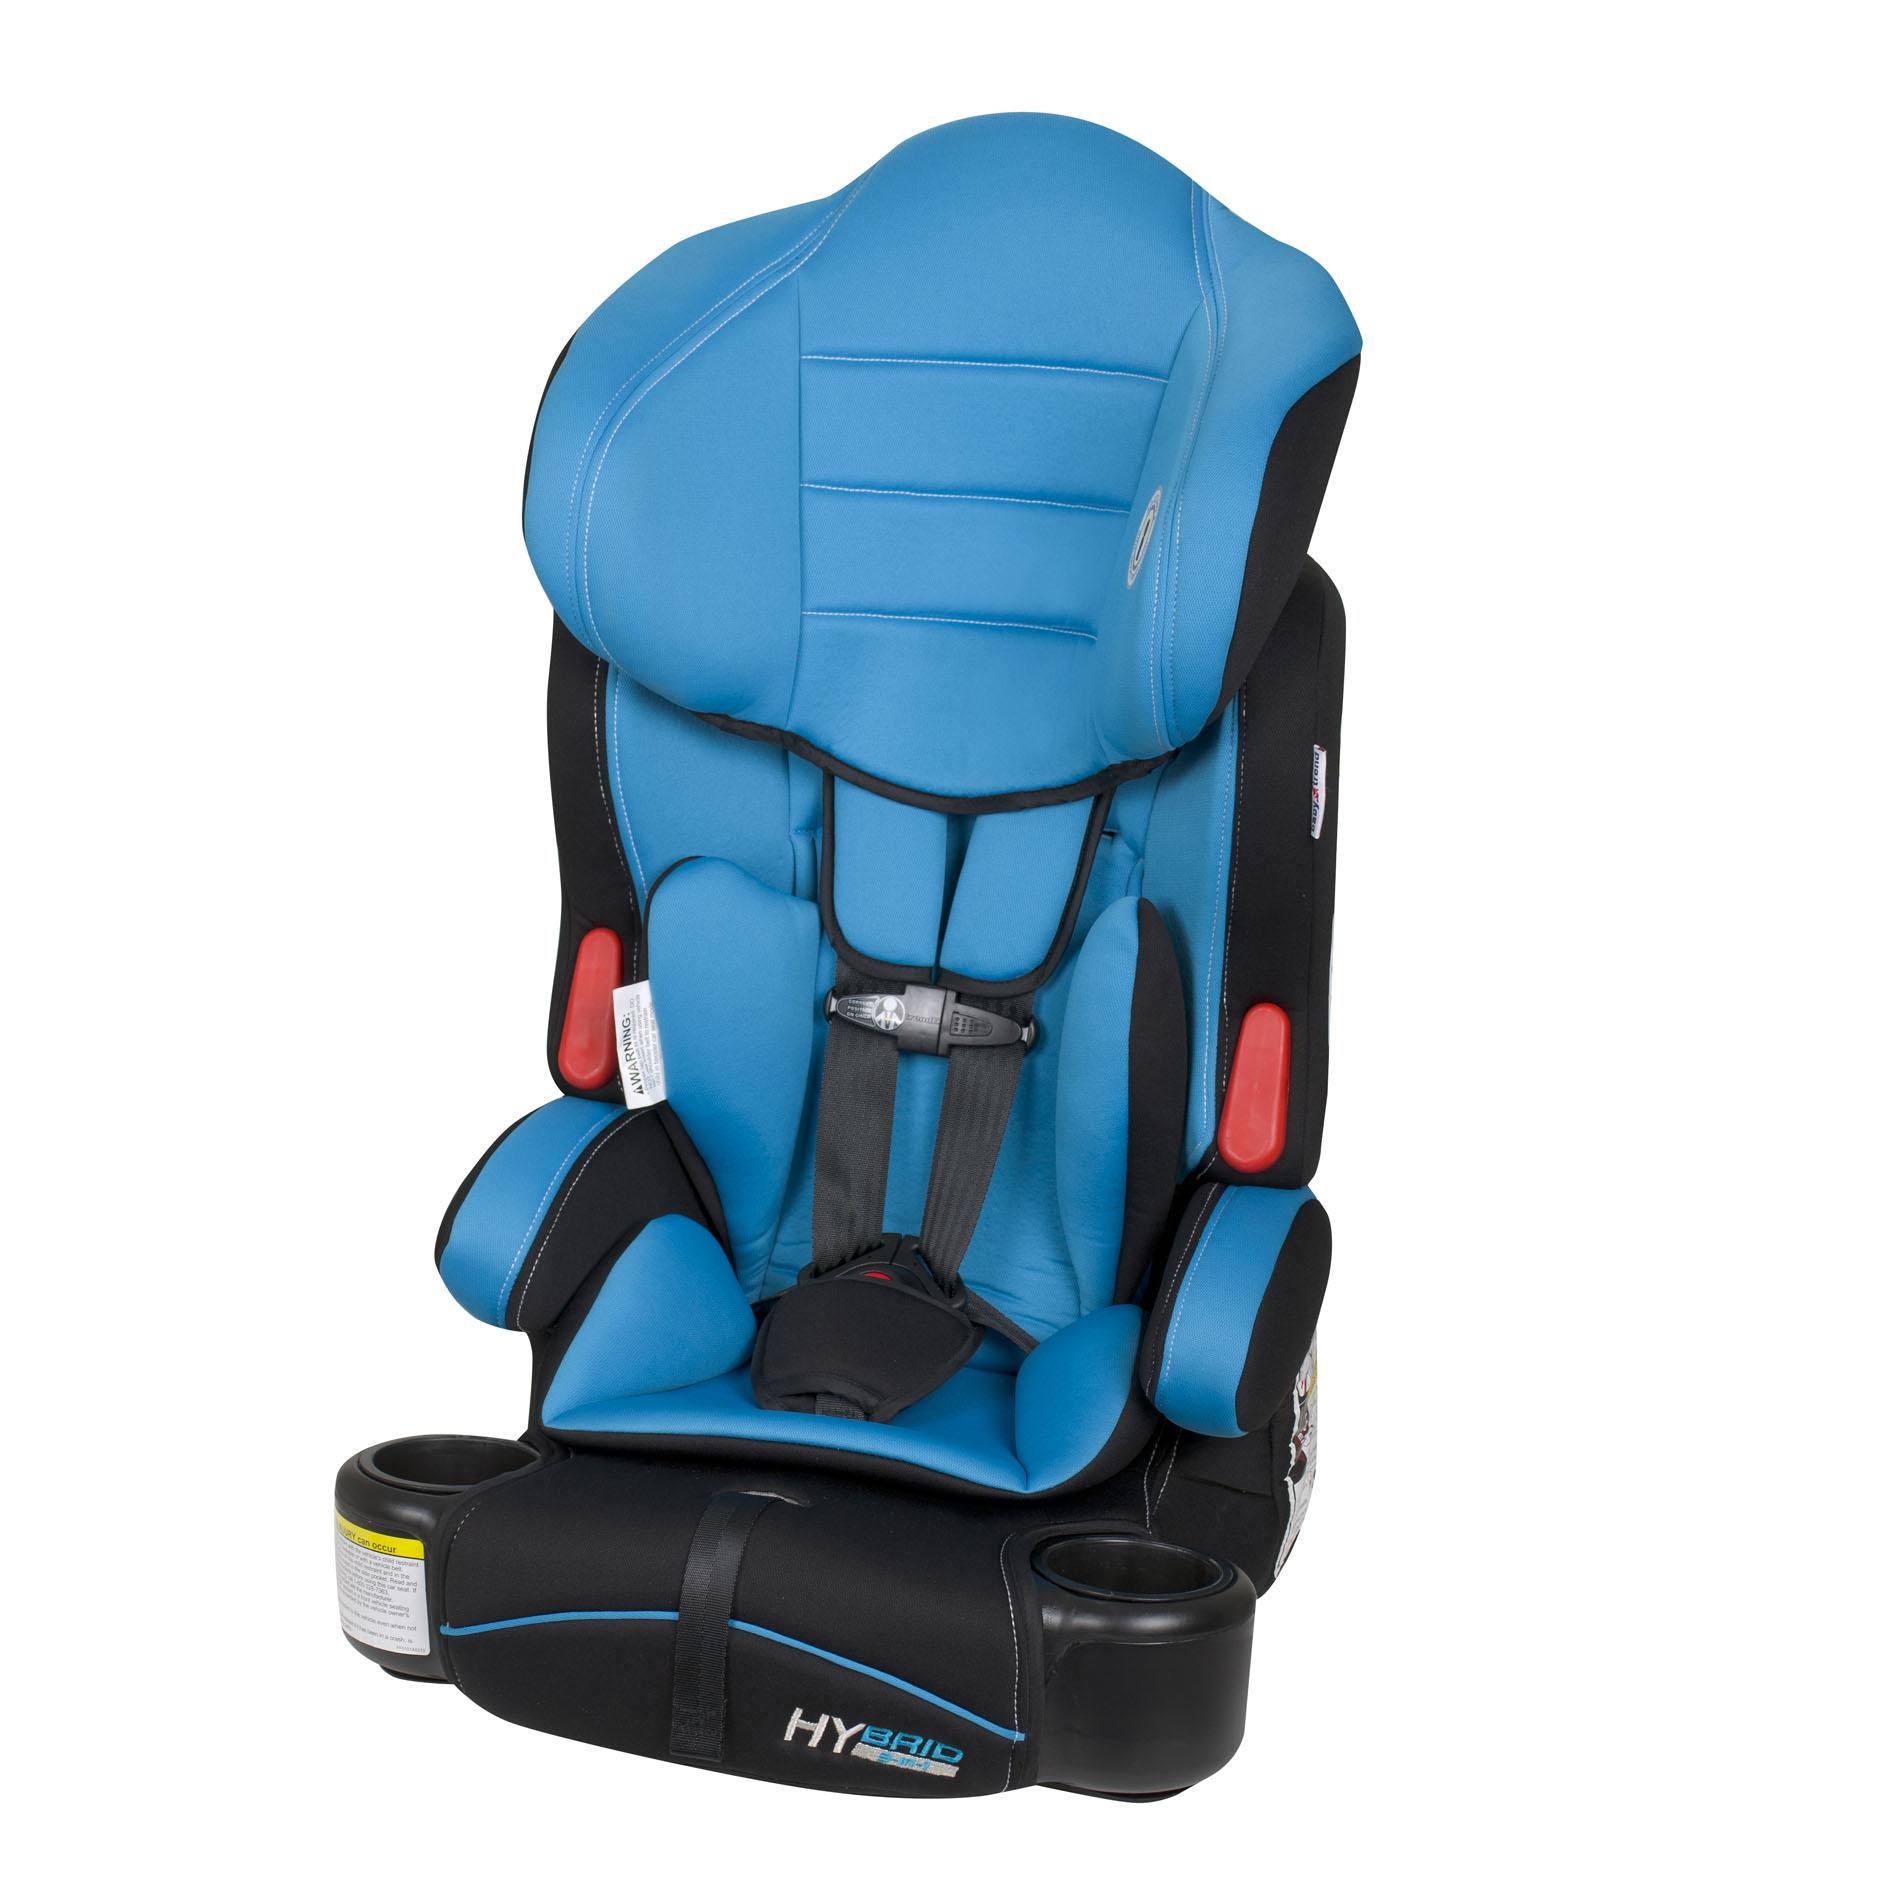 Baby Trend Hybrid 3-in-1 Booster Car Seat